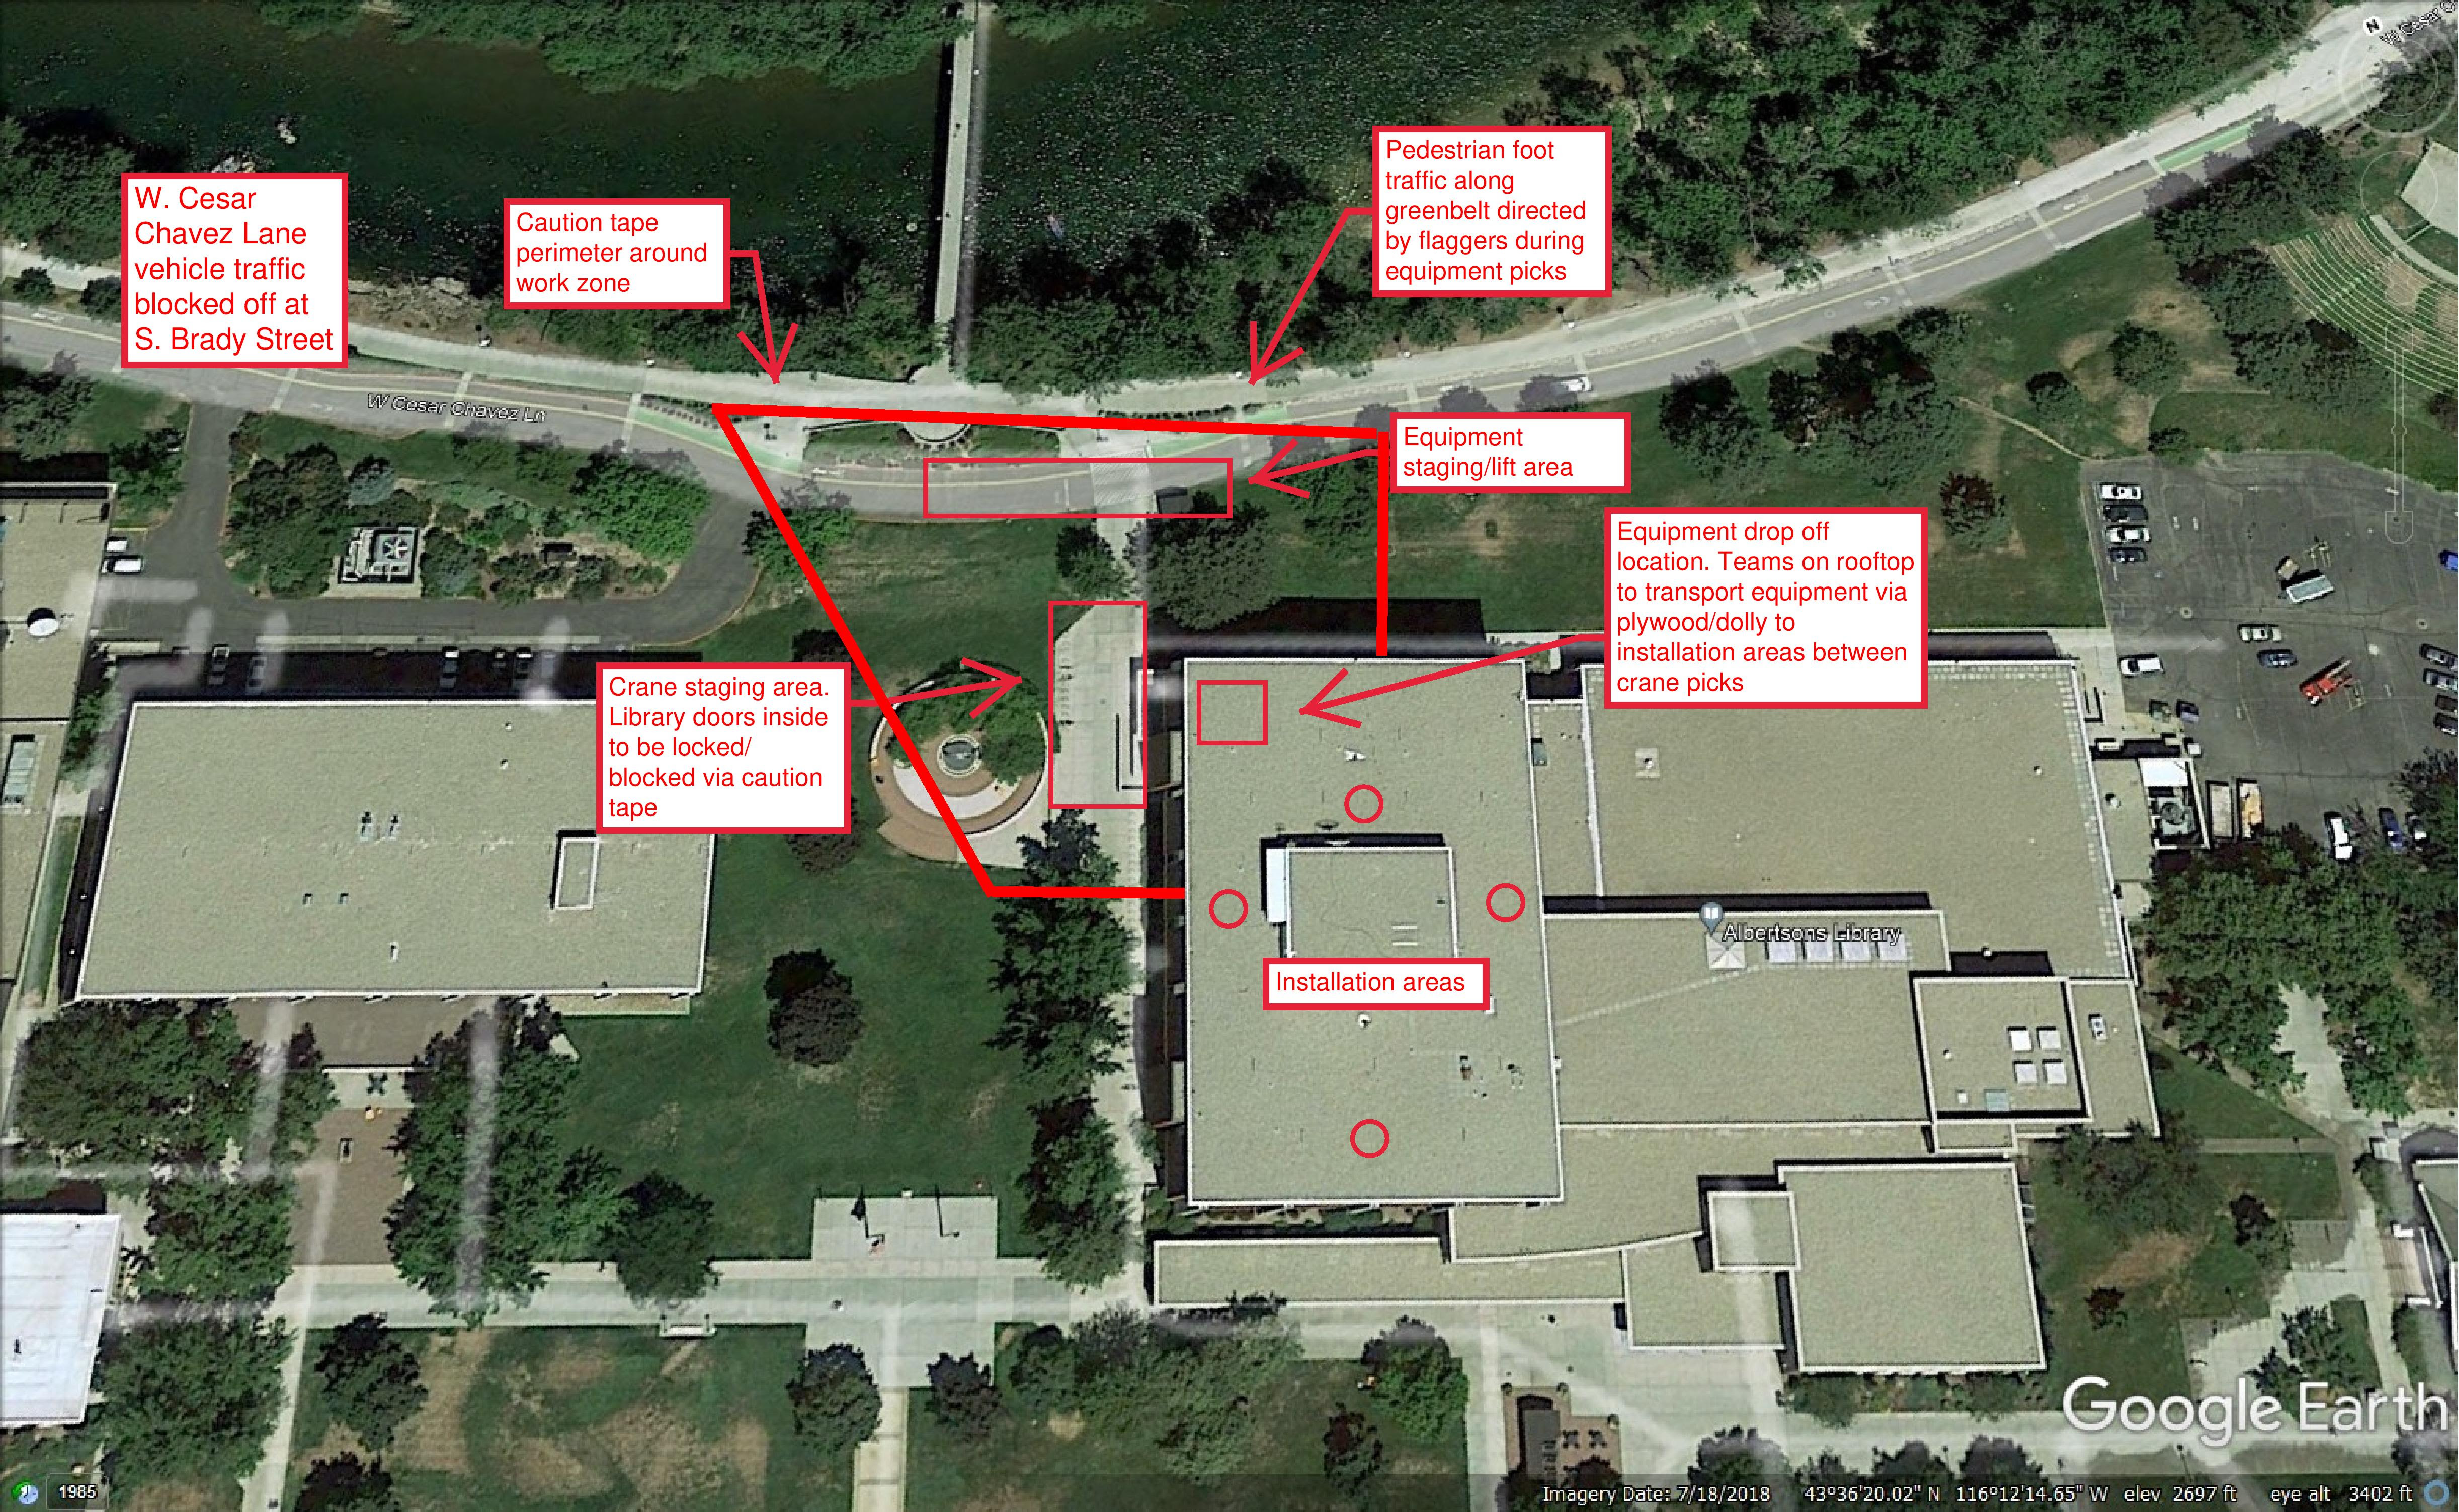 map of affected area on campus